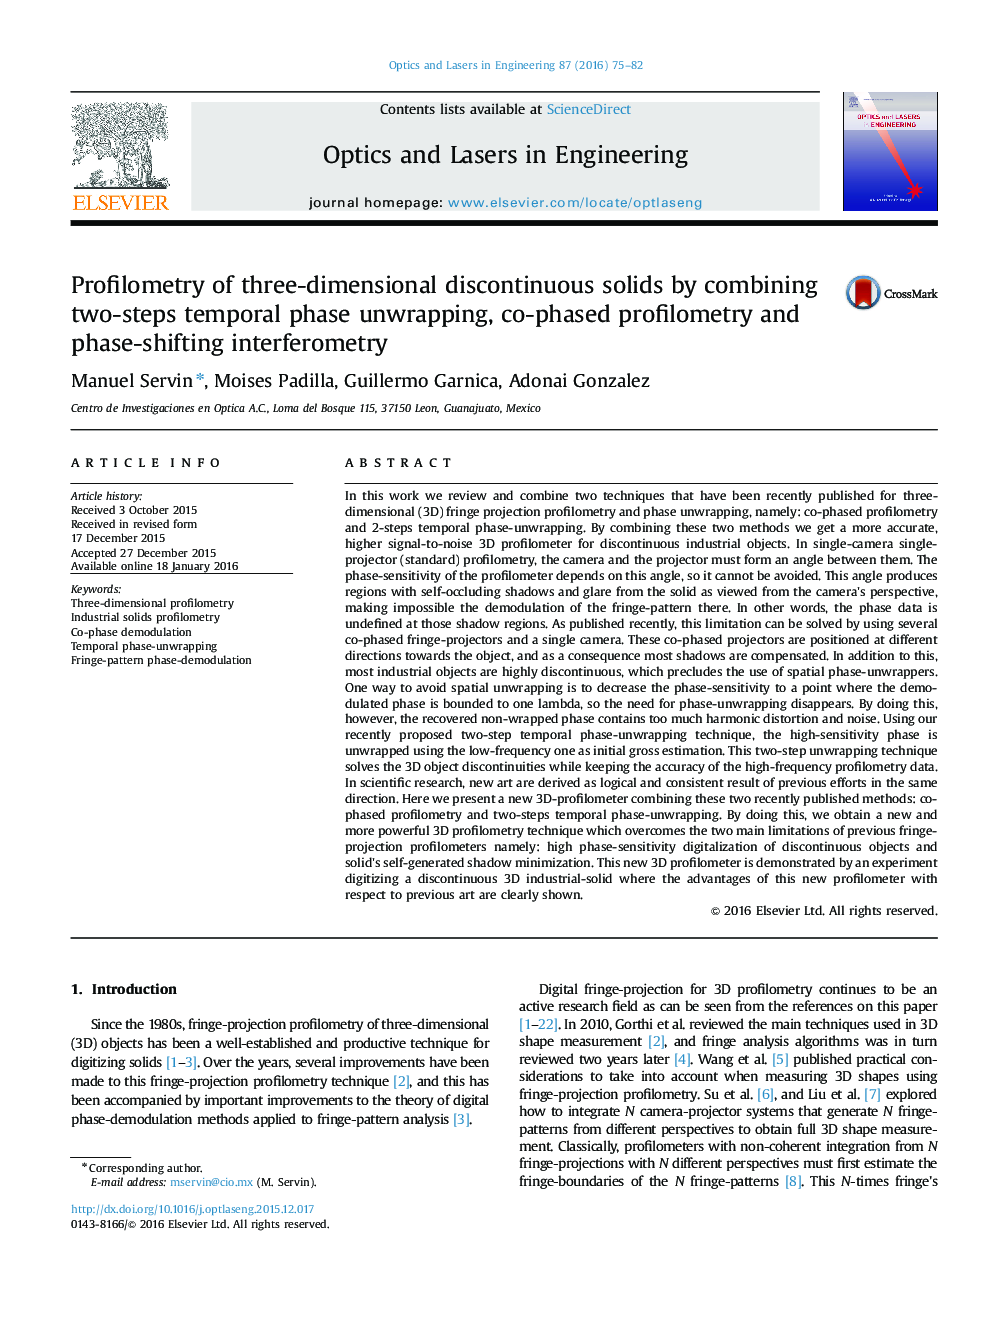 Profilometry of three-dimensional discontinuous solids by combining two-steps temporal phase unwrapping, co-phased profilometry and phase-shifting interferometry